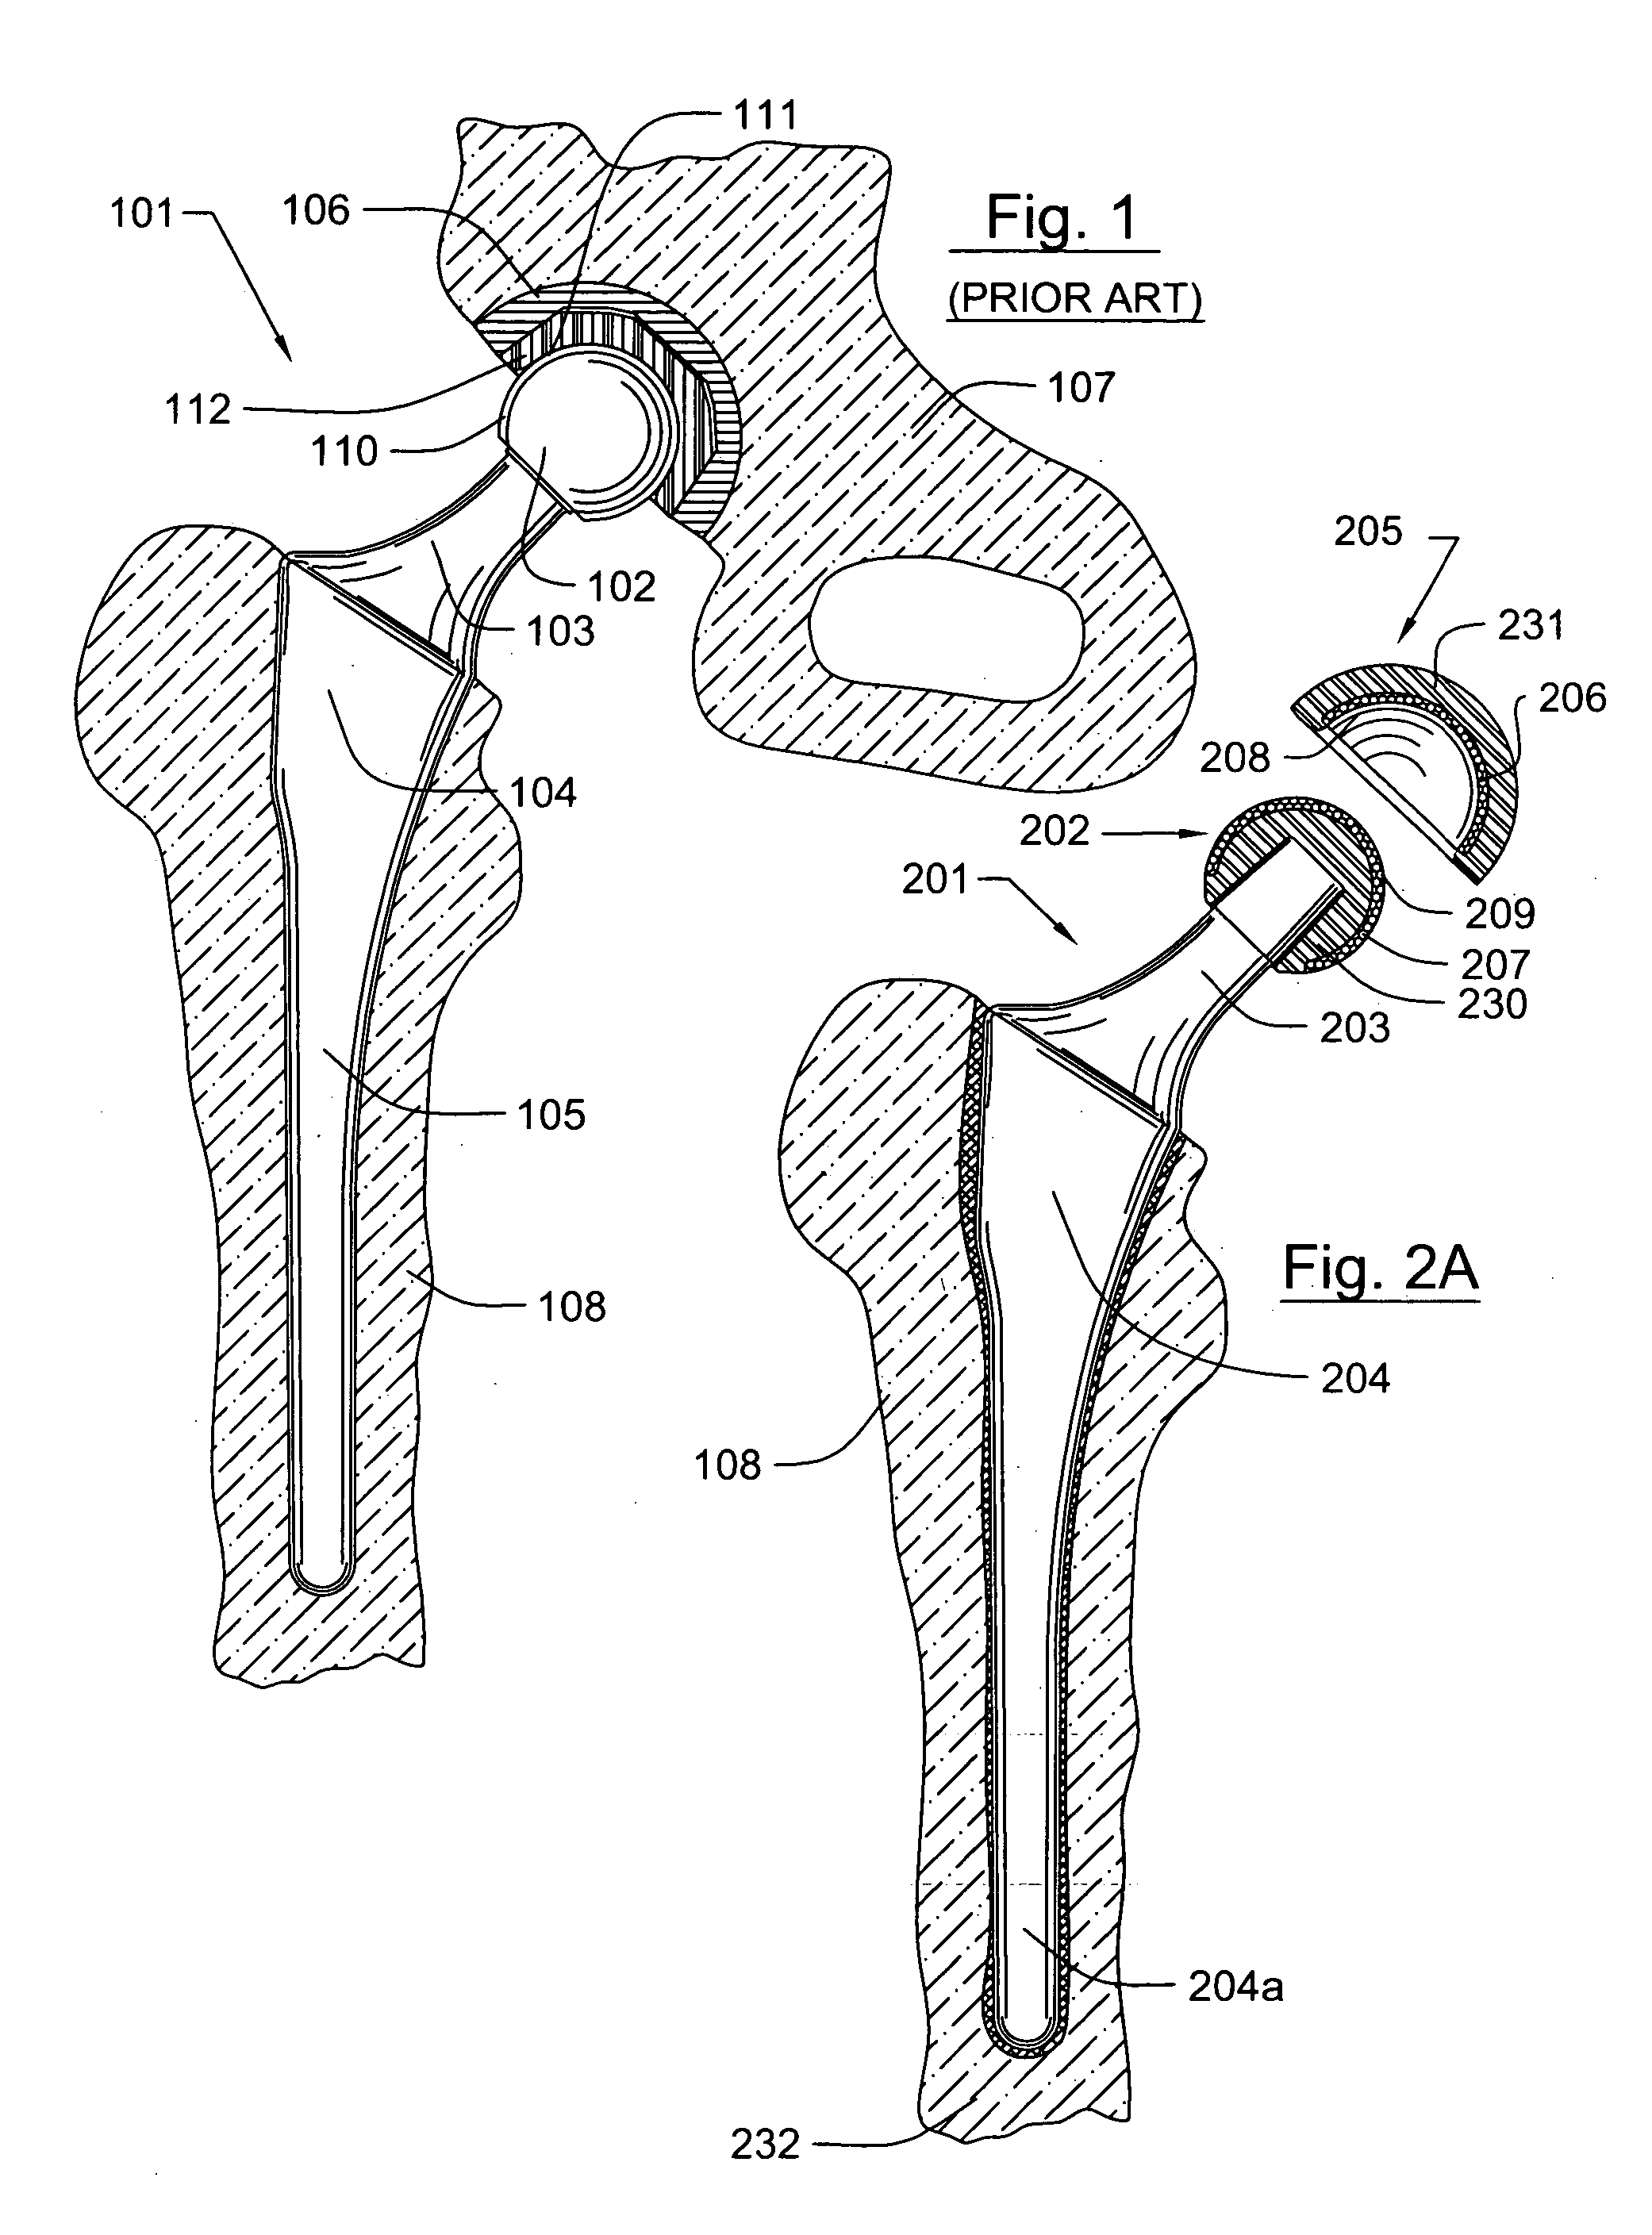 Prosthetic knee joint having at least one diamond articulation surface